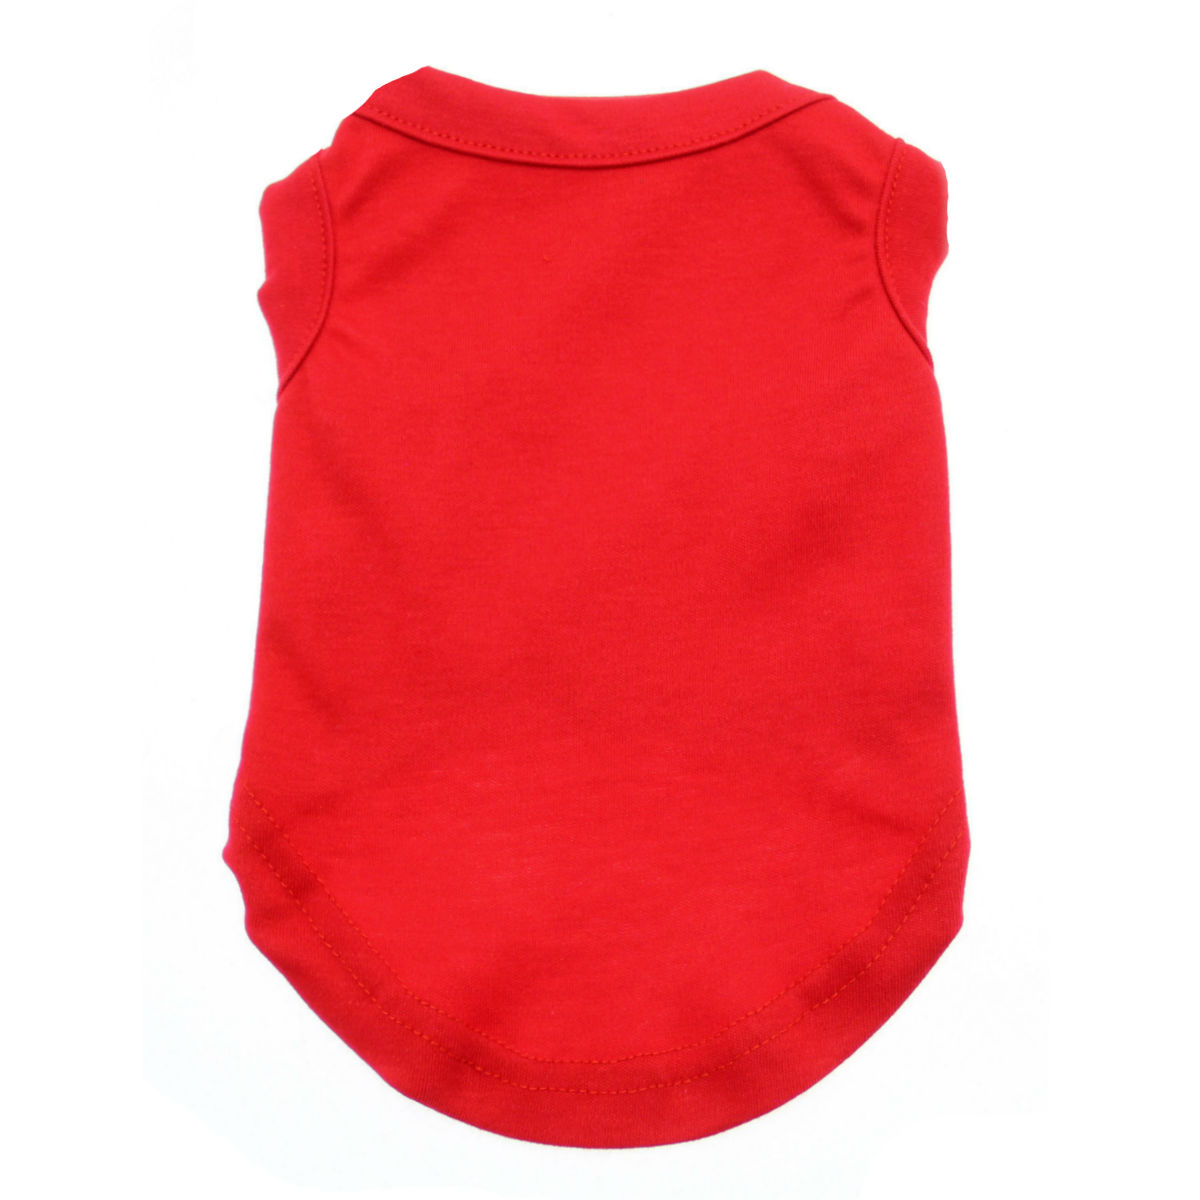 Plain Dog and Cat Shirt - Red | BaxterBoo